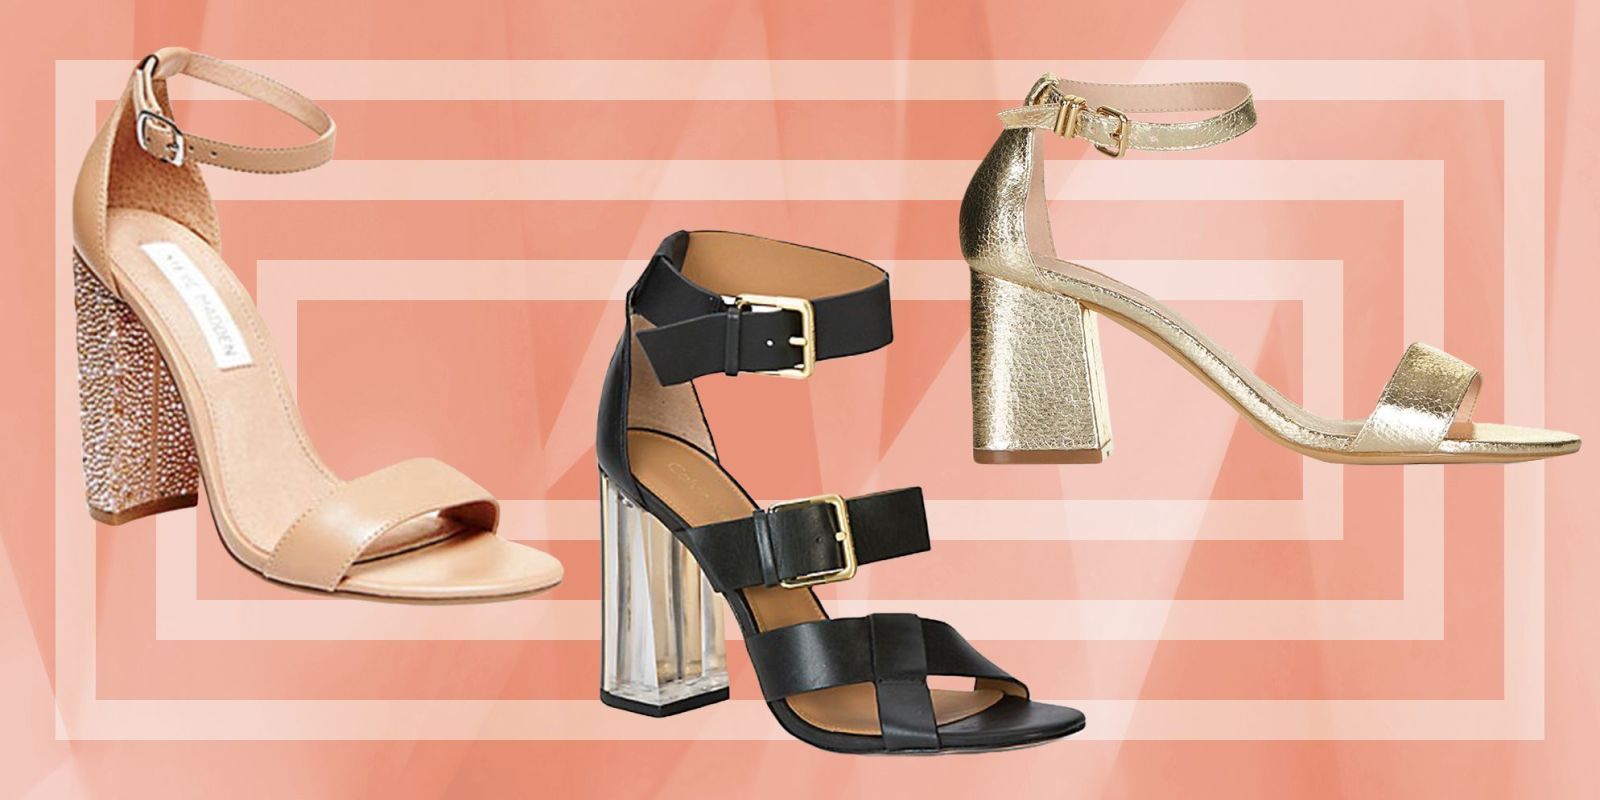 21 Comfortable High Heels That Will Get Your Through Holiday Party Season -  ELLE.com | Comfortable high heels, Heels, Most comfortable high heels